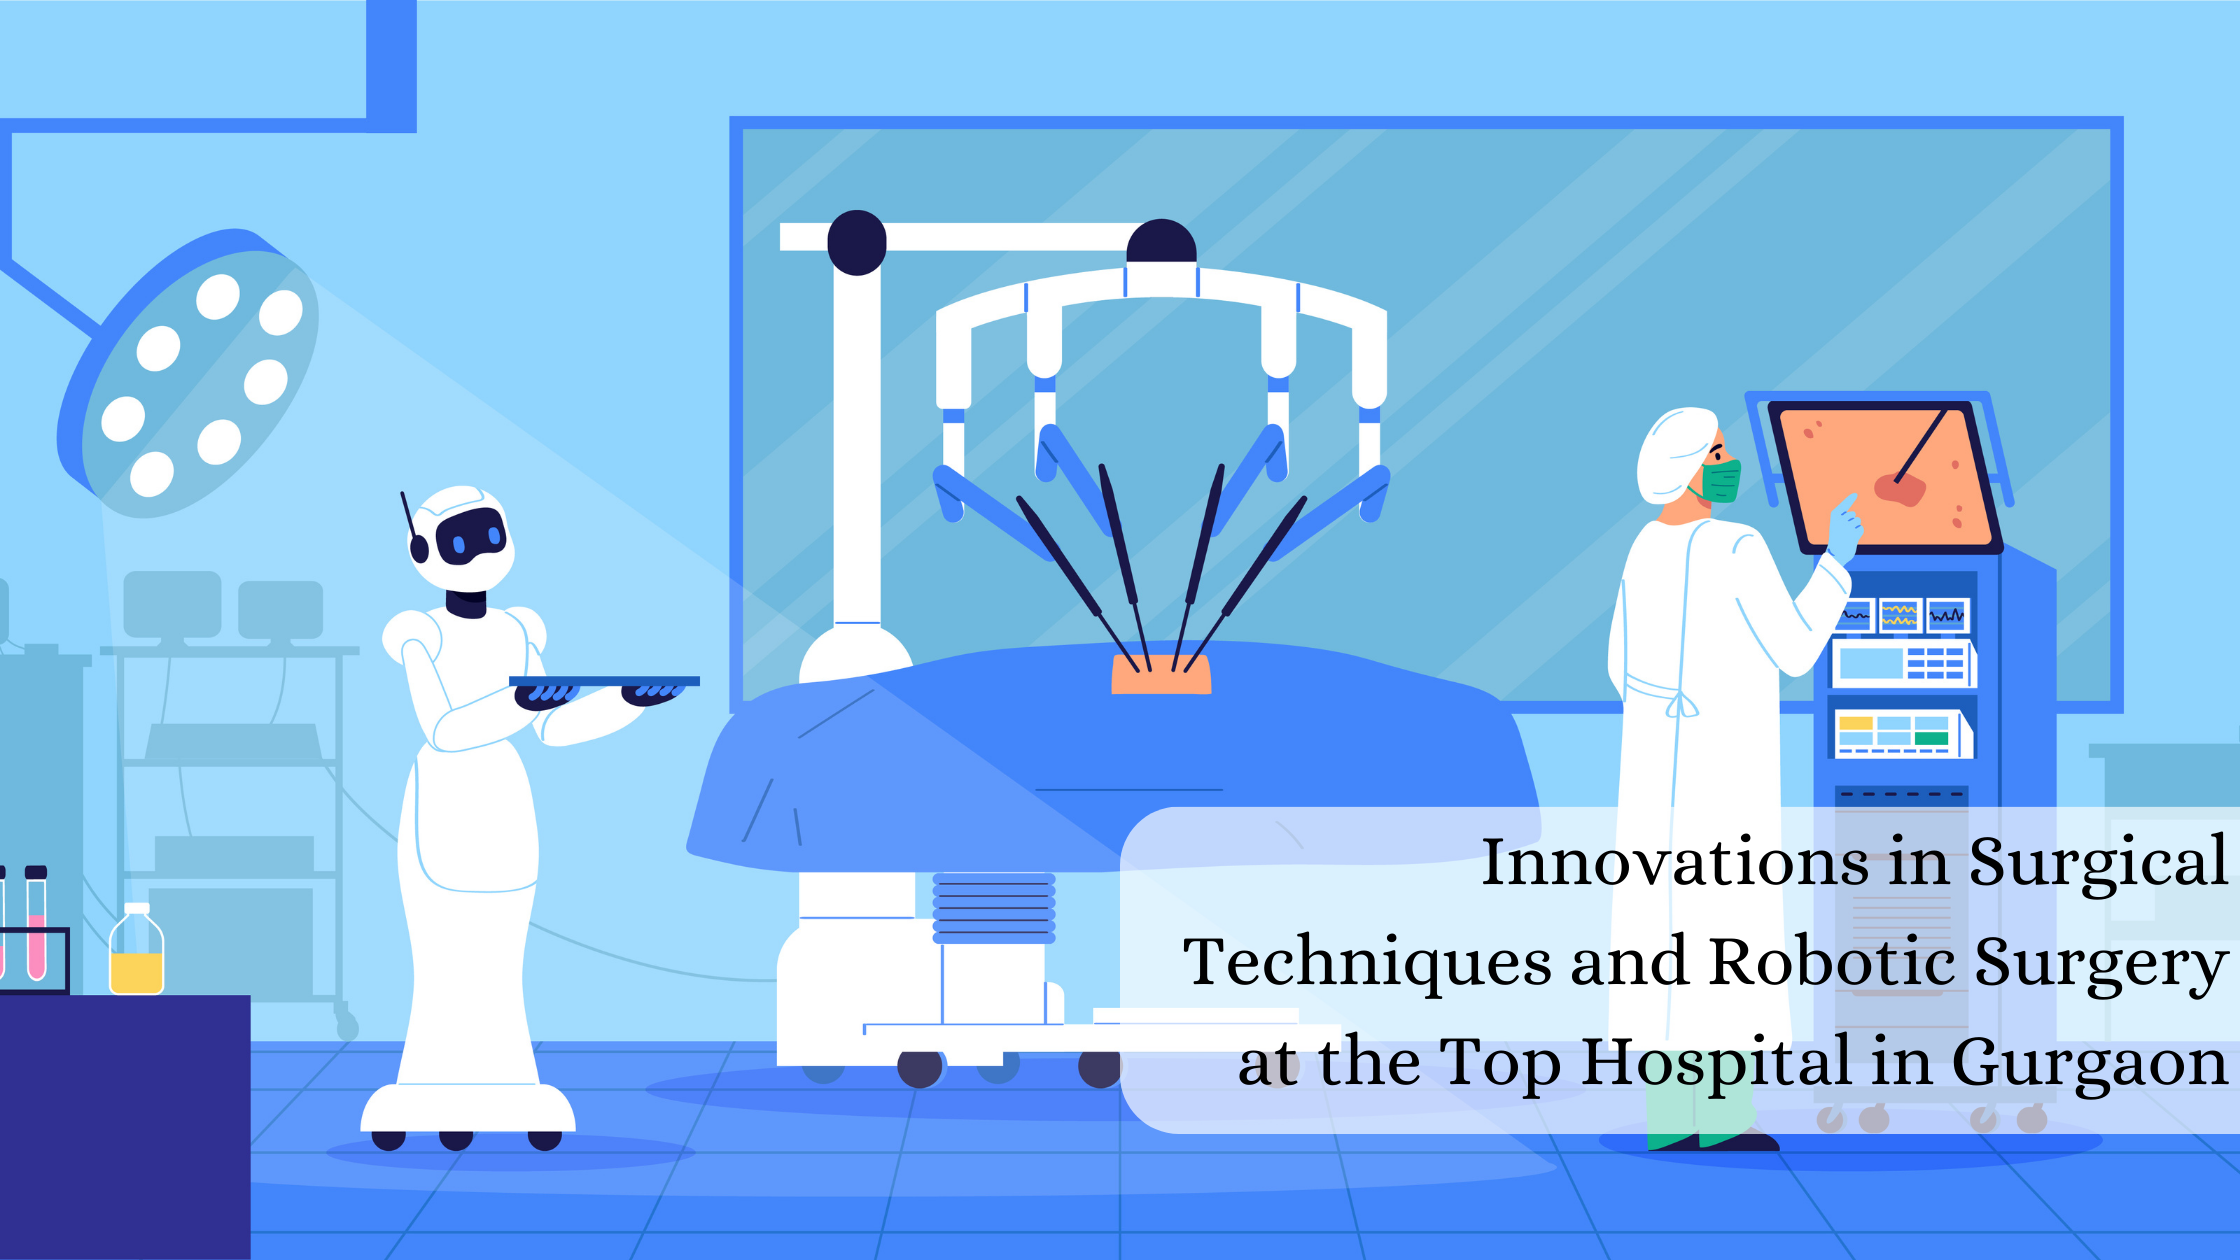 Innovations in Surgical Techniques and Robotic Surgery